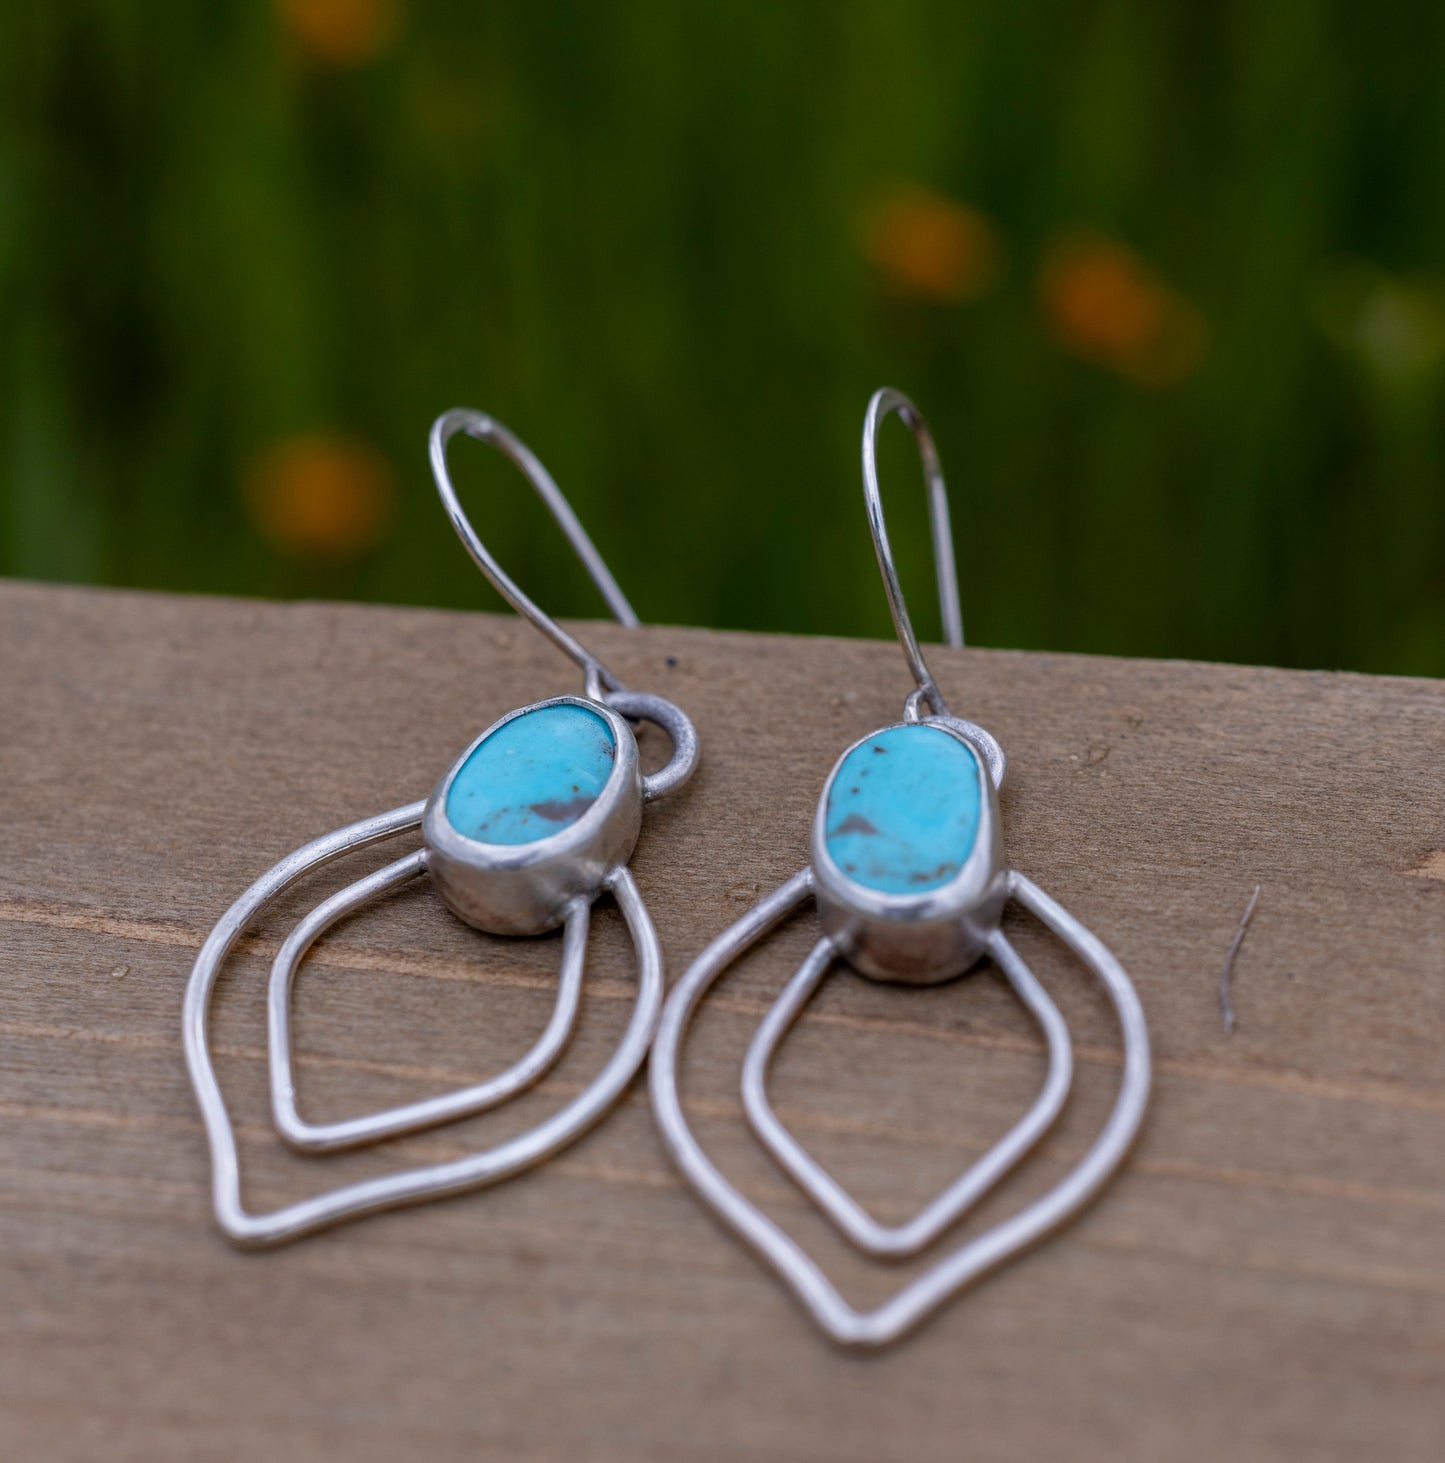 Double Petals with Turquoise Stone Earrings